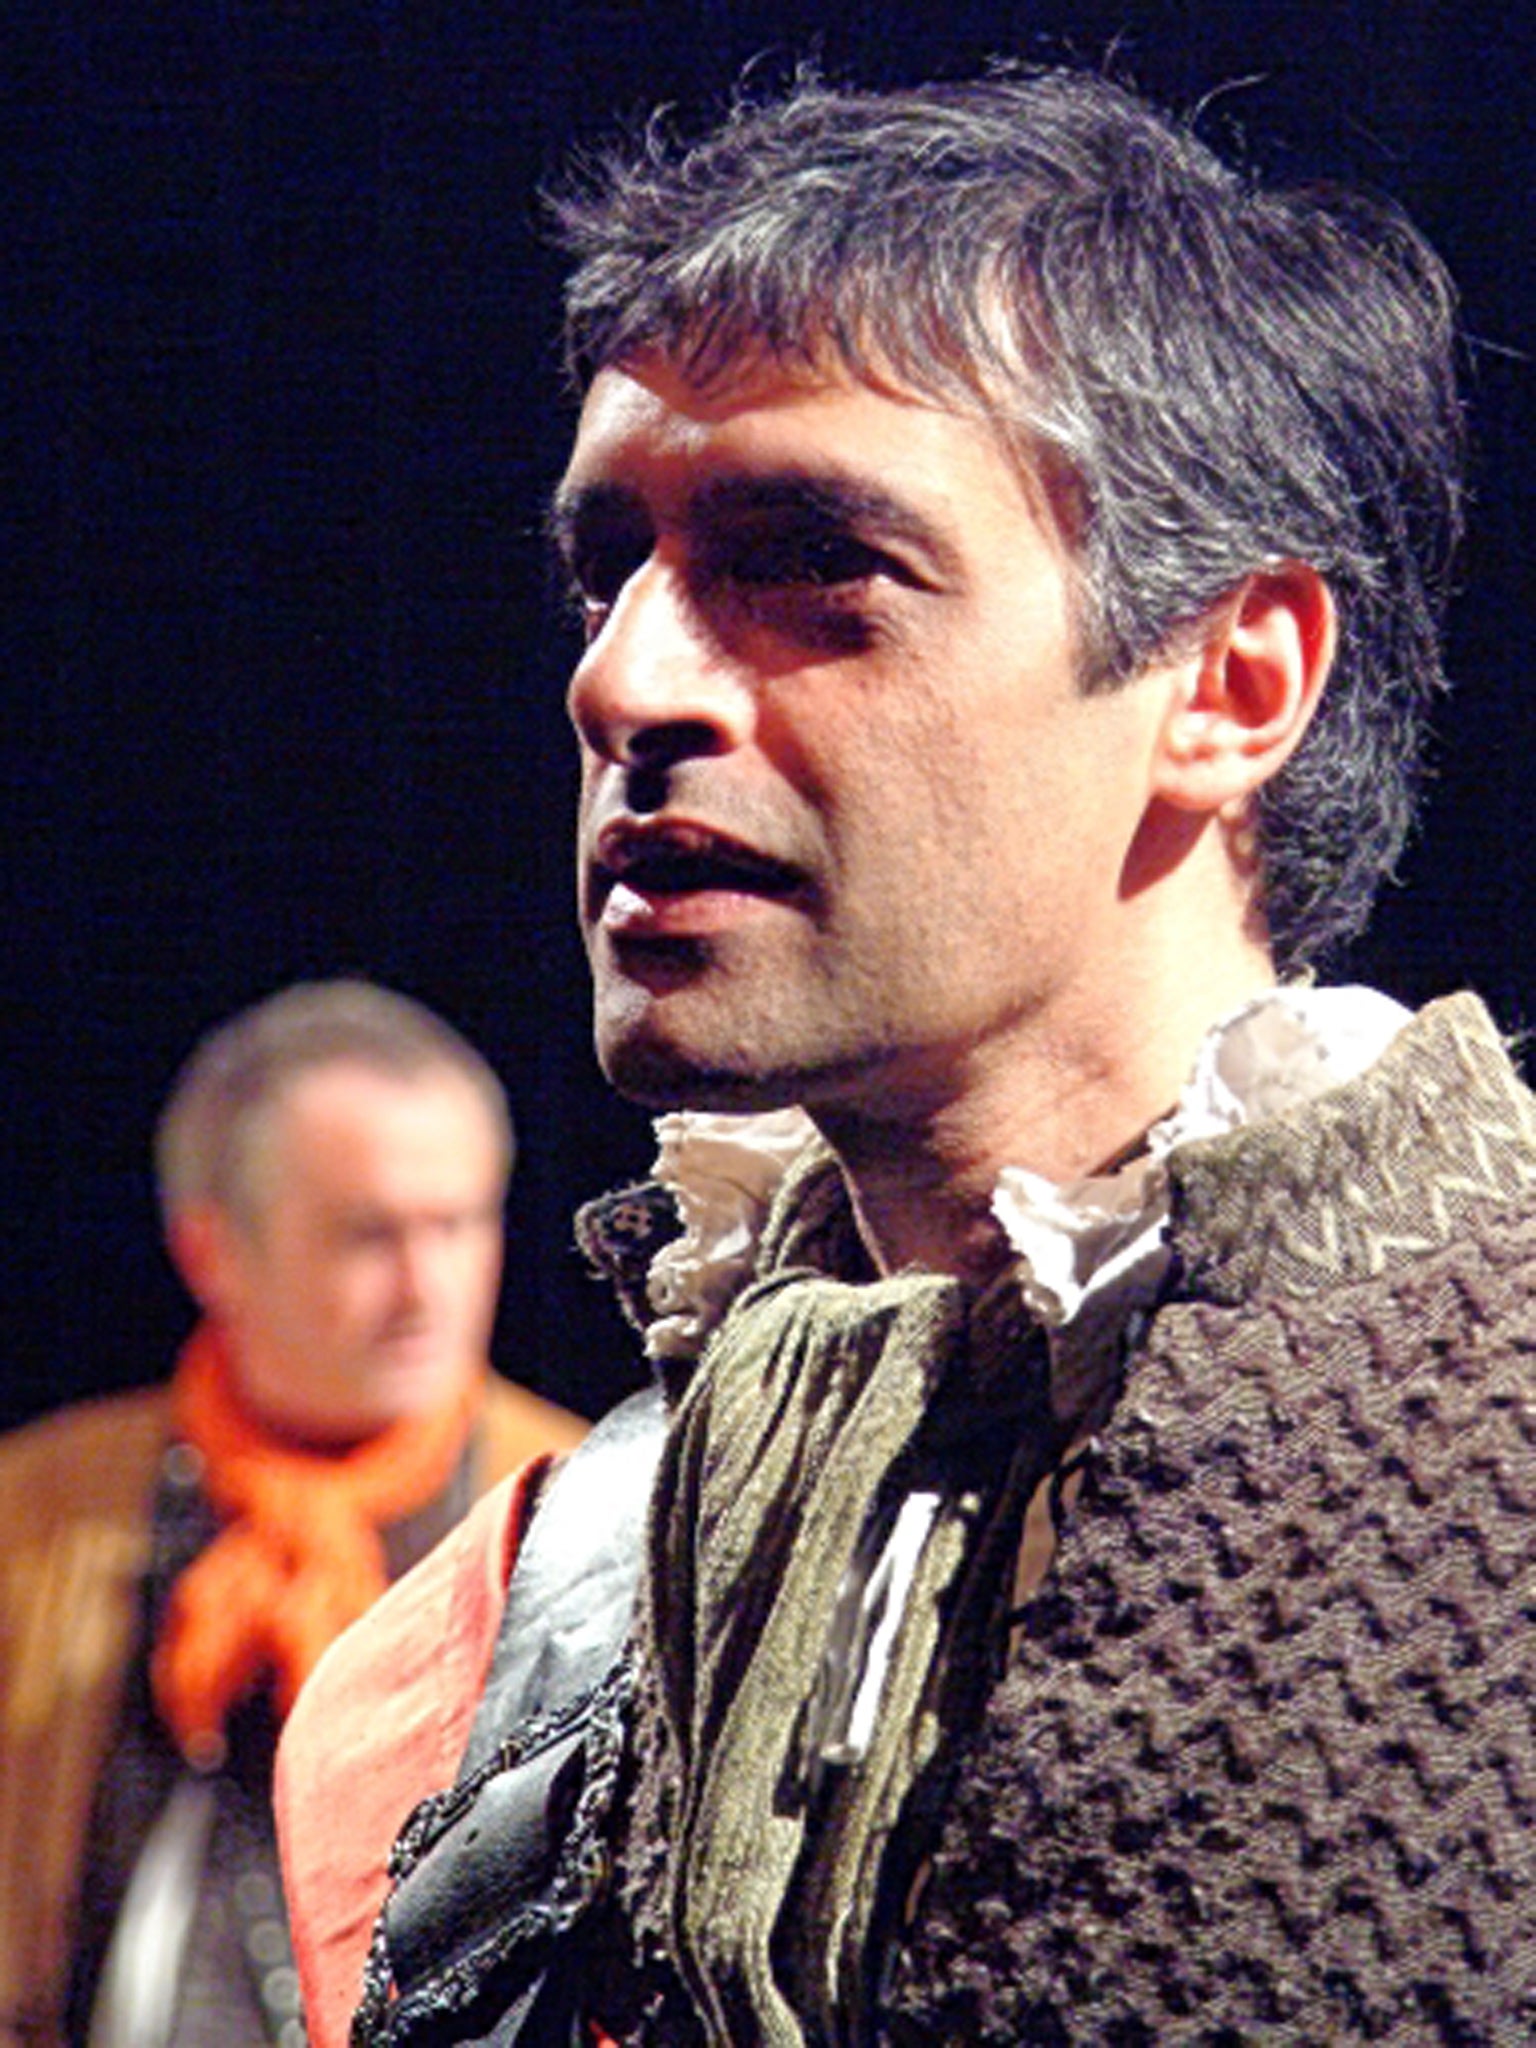 In 'The Mayor of Zalamea' at the Everyman Theatre in Liverpool in 2004